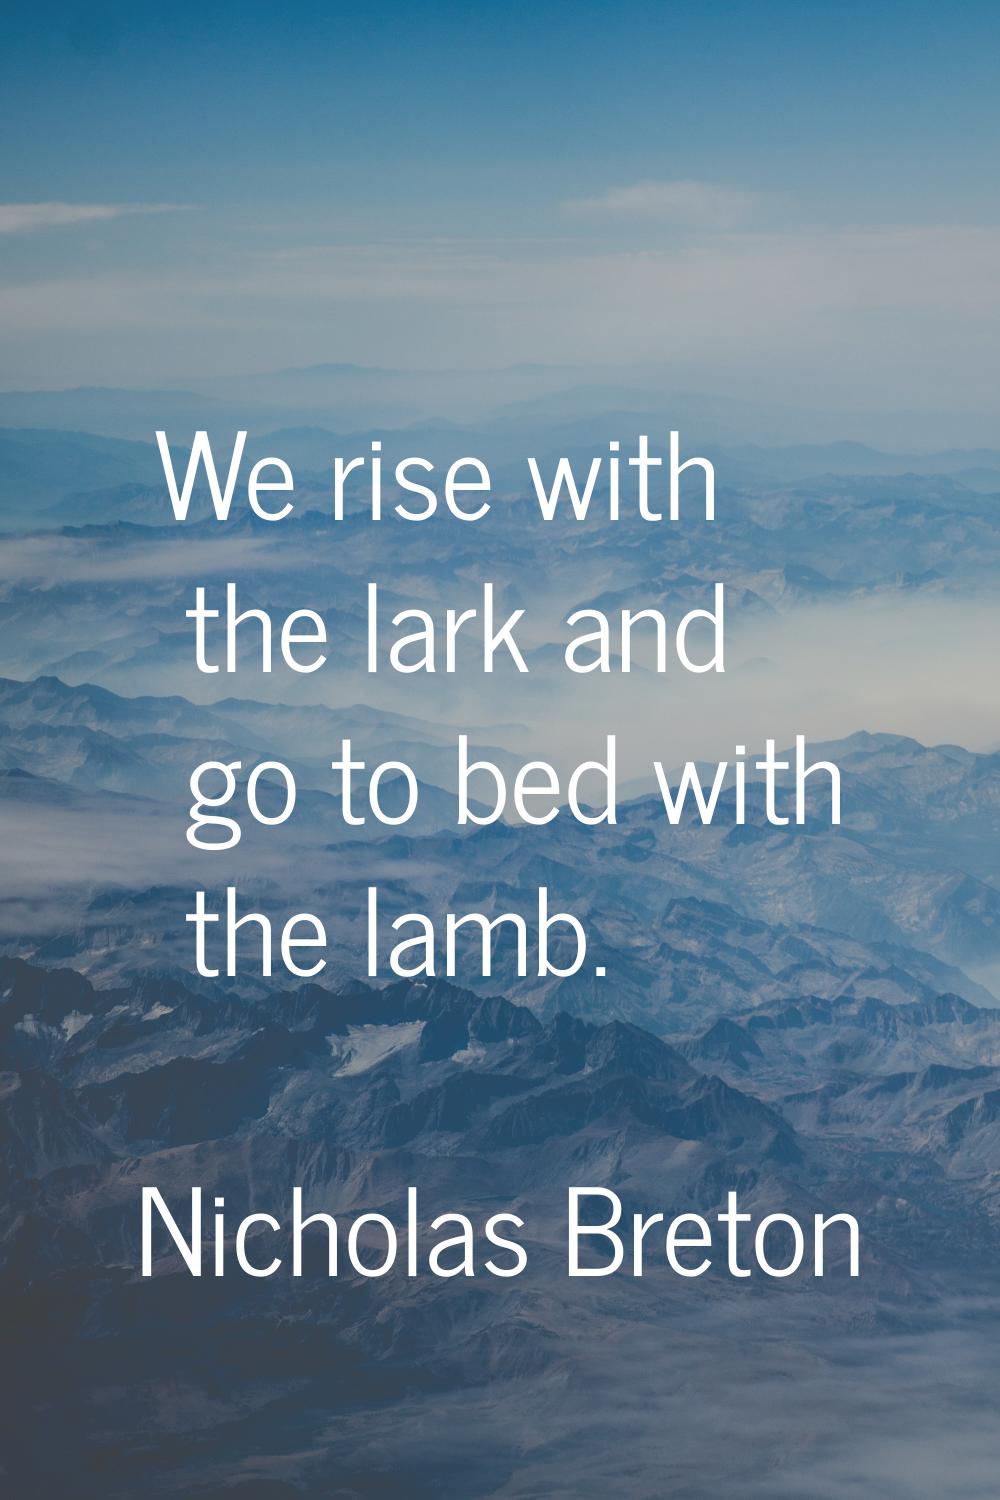 We rise with the lark and go to bed with the lamb.